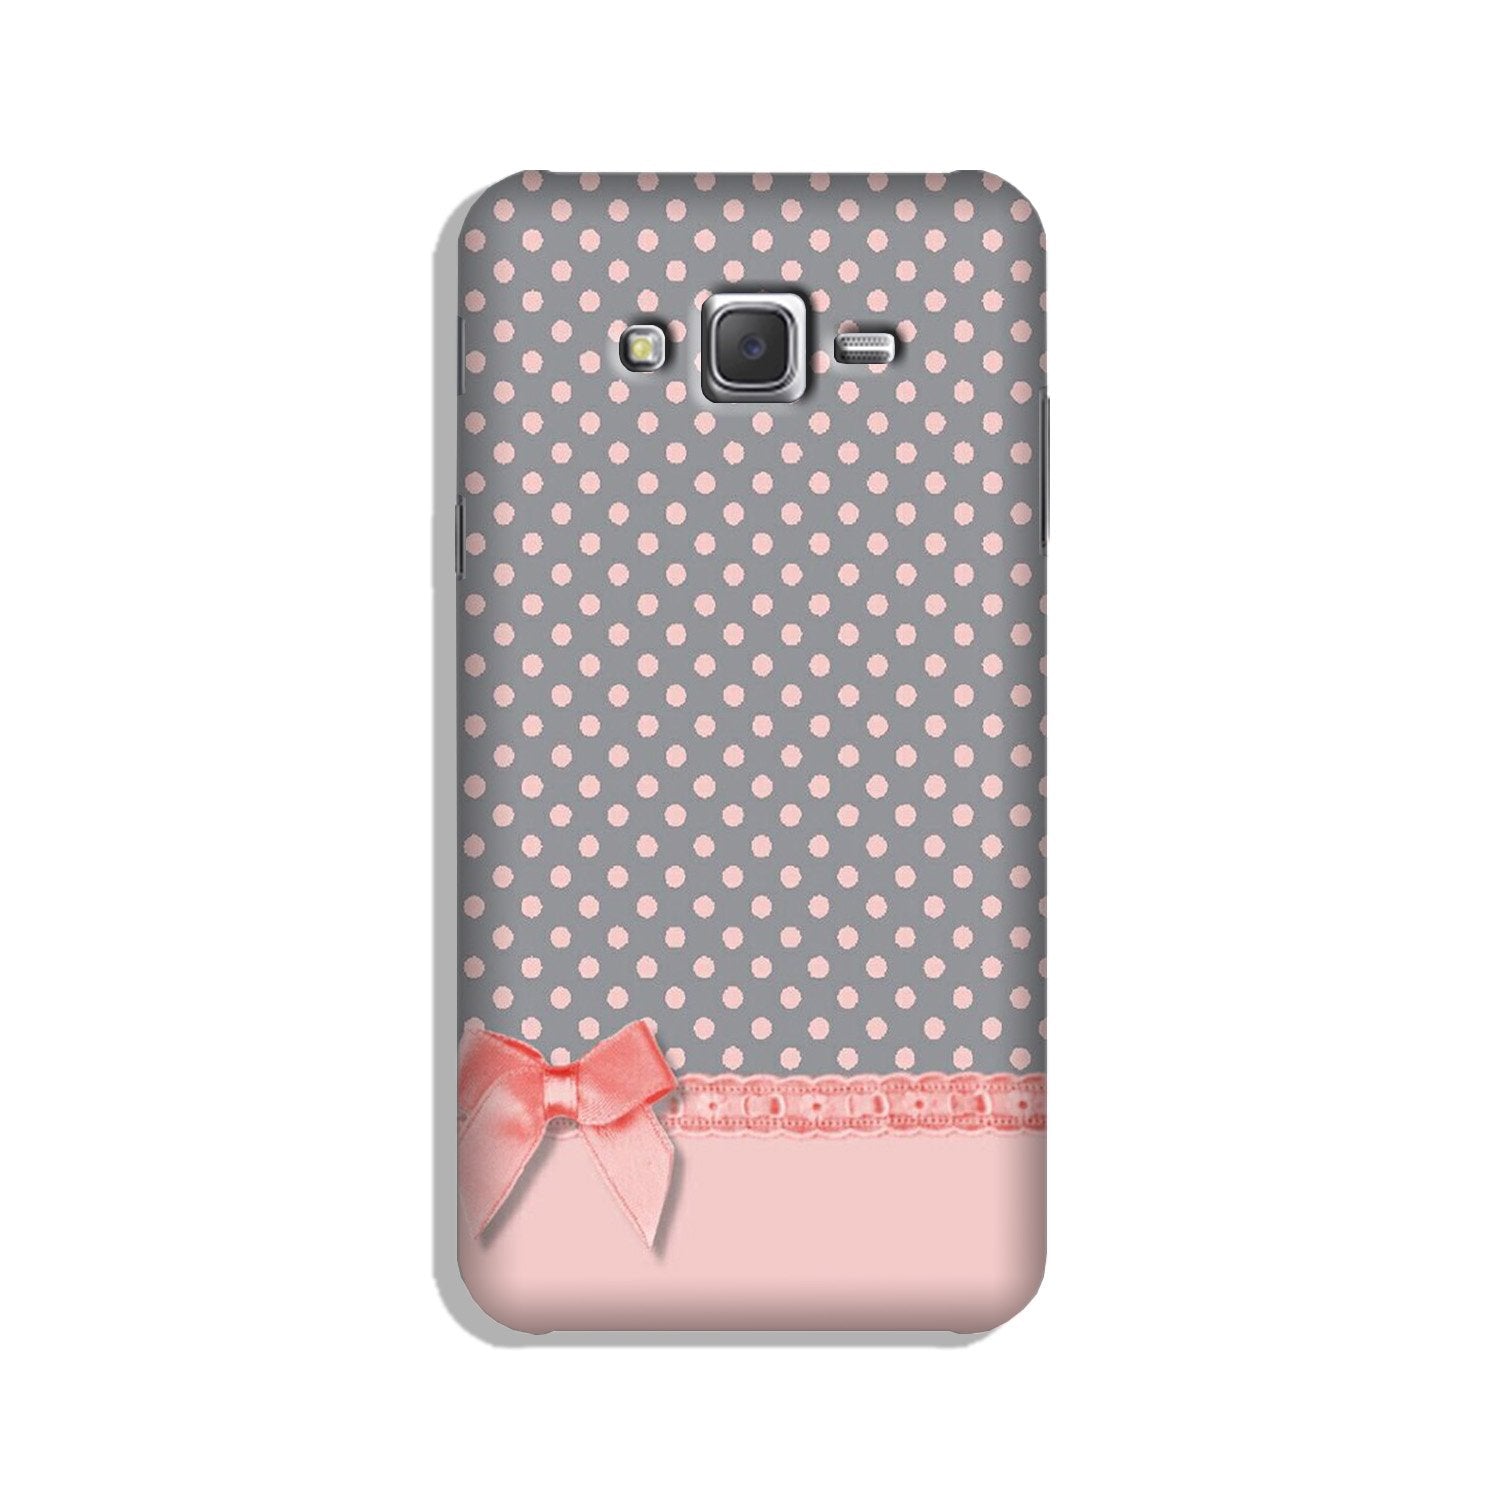 Gift Wrap2 Case for Galaxy J7 (2015)